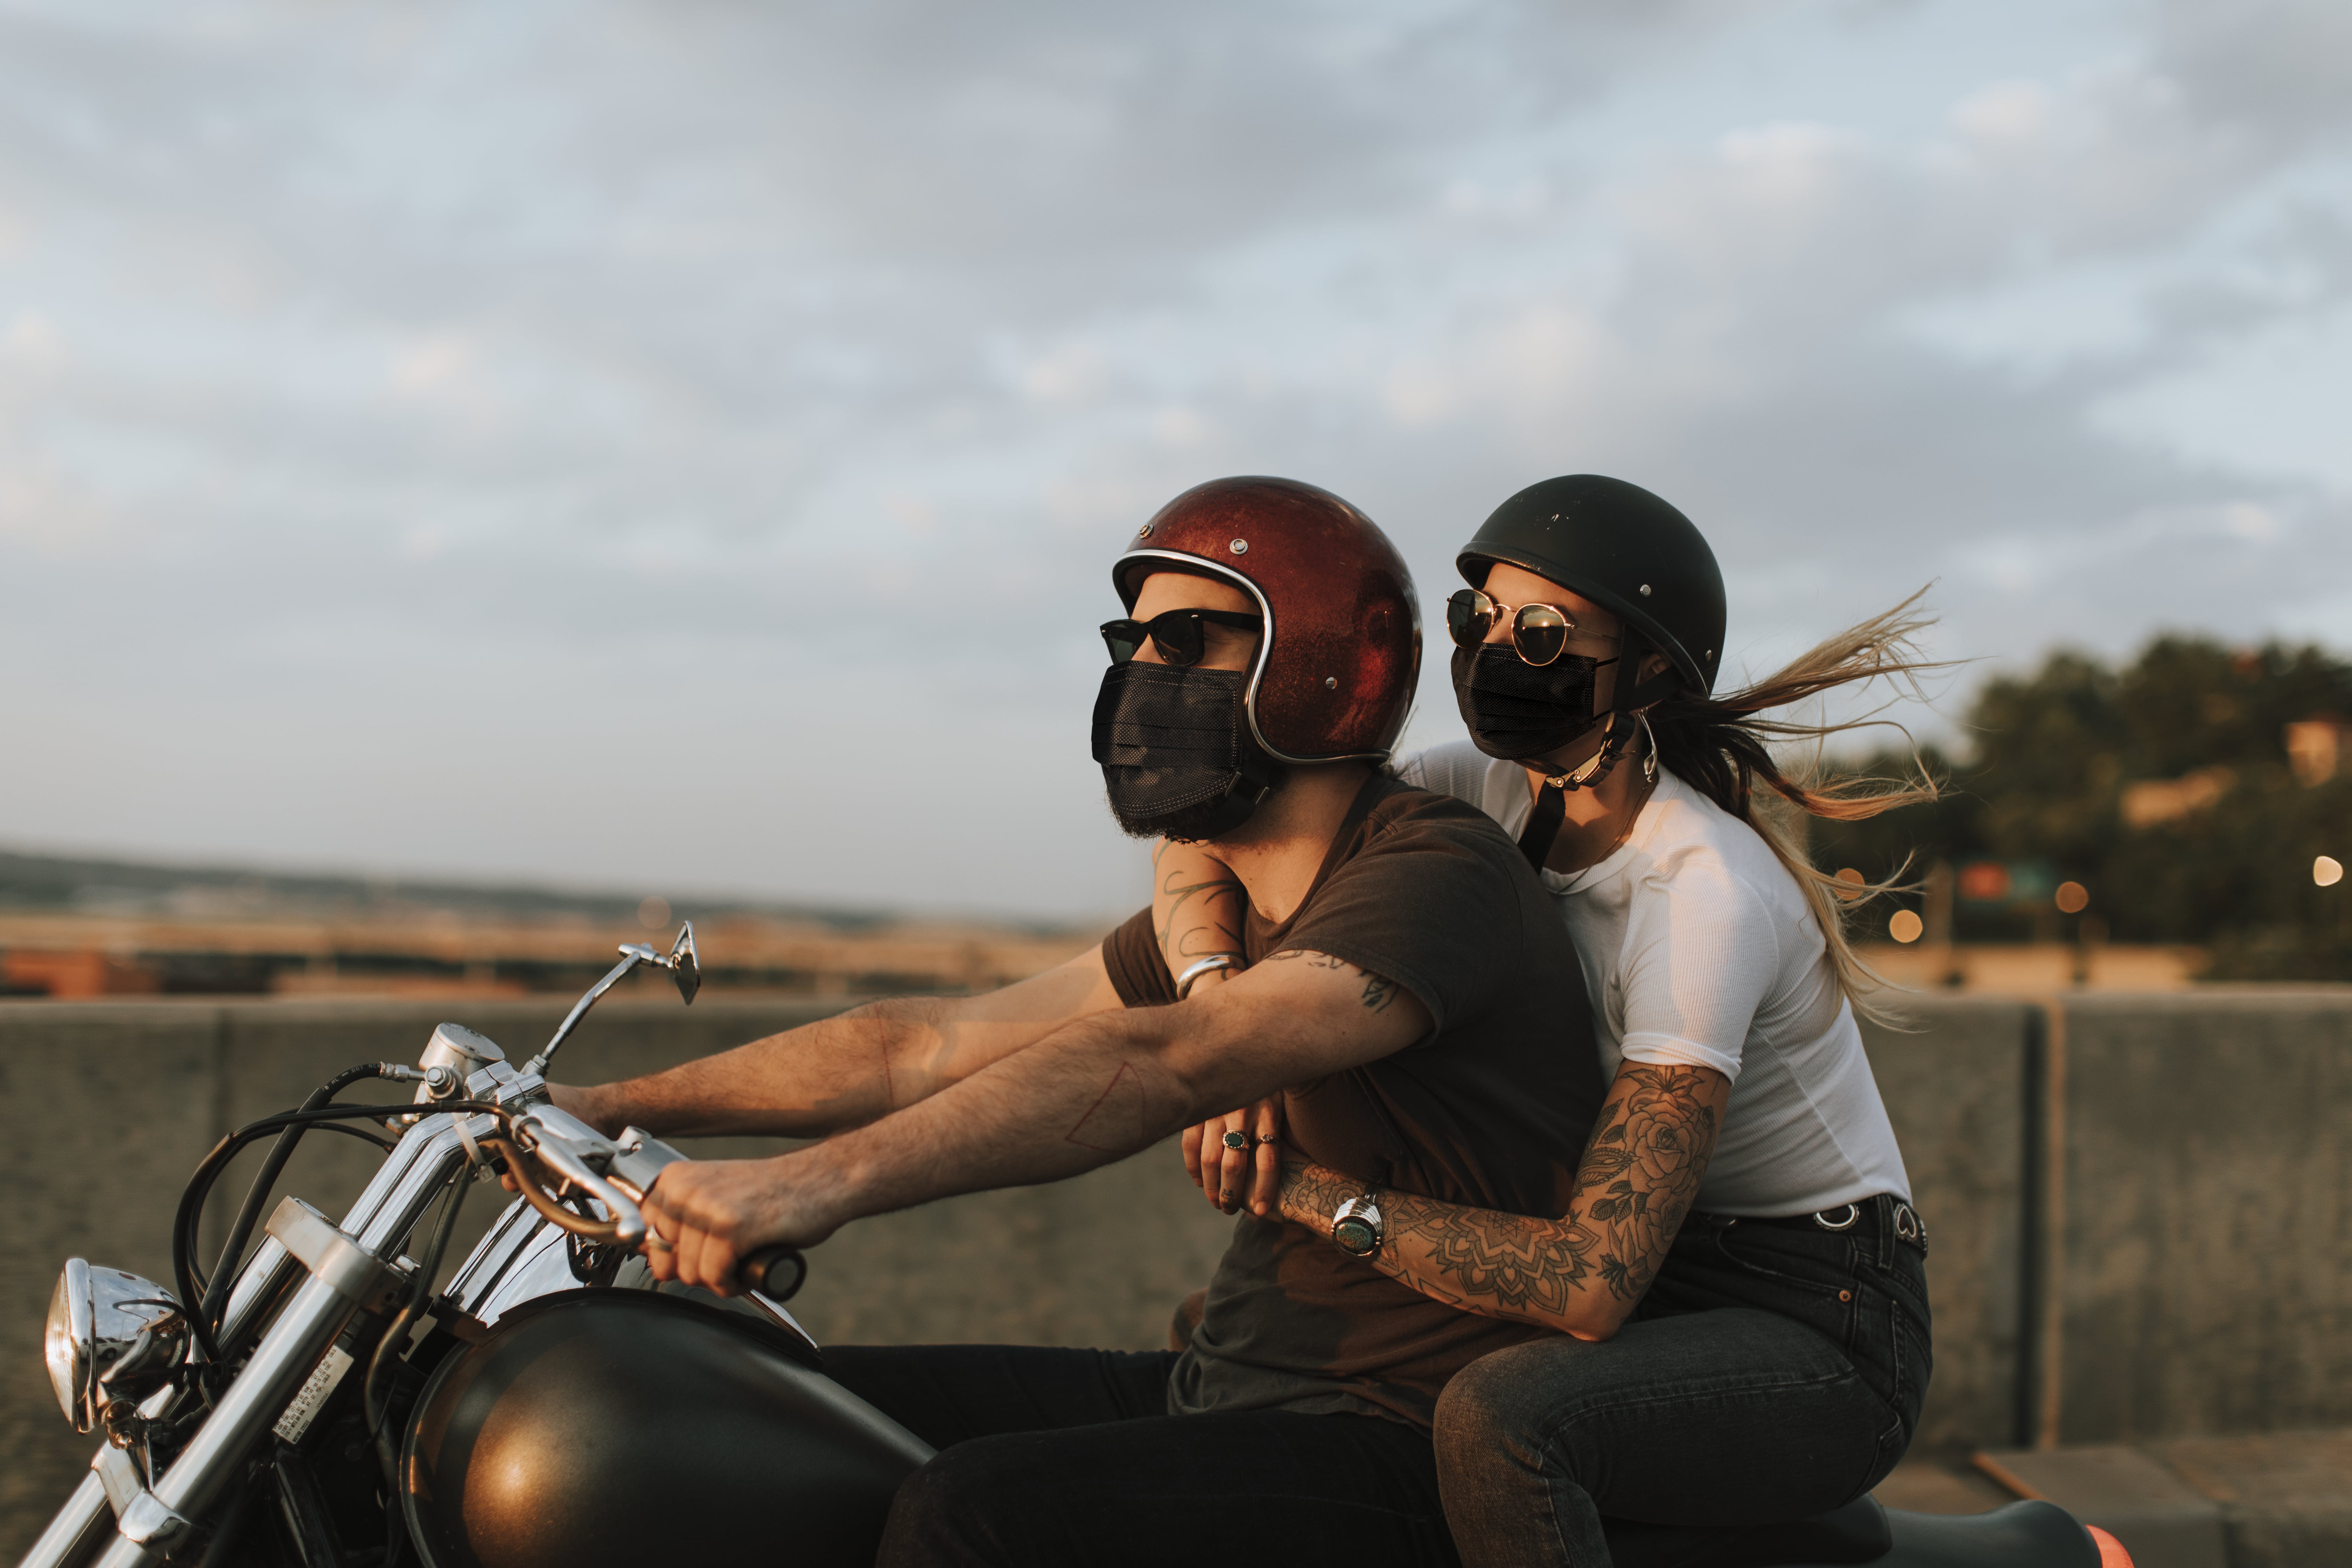 bikers-wearing-masks-new-normal-lifestyle-min